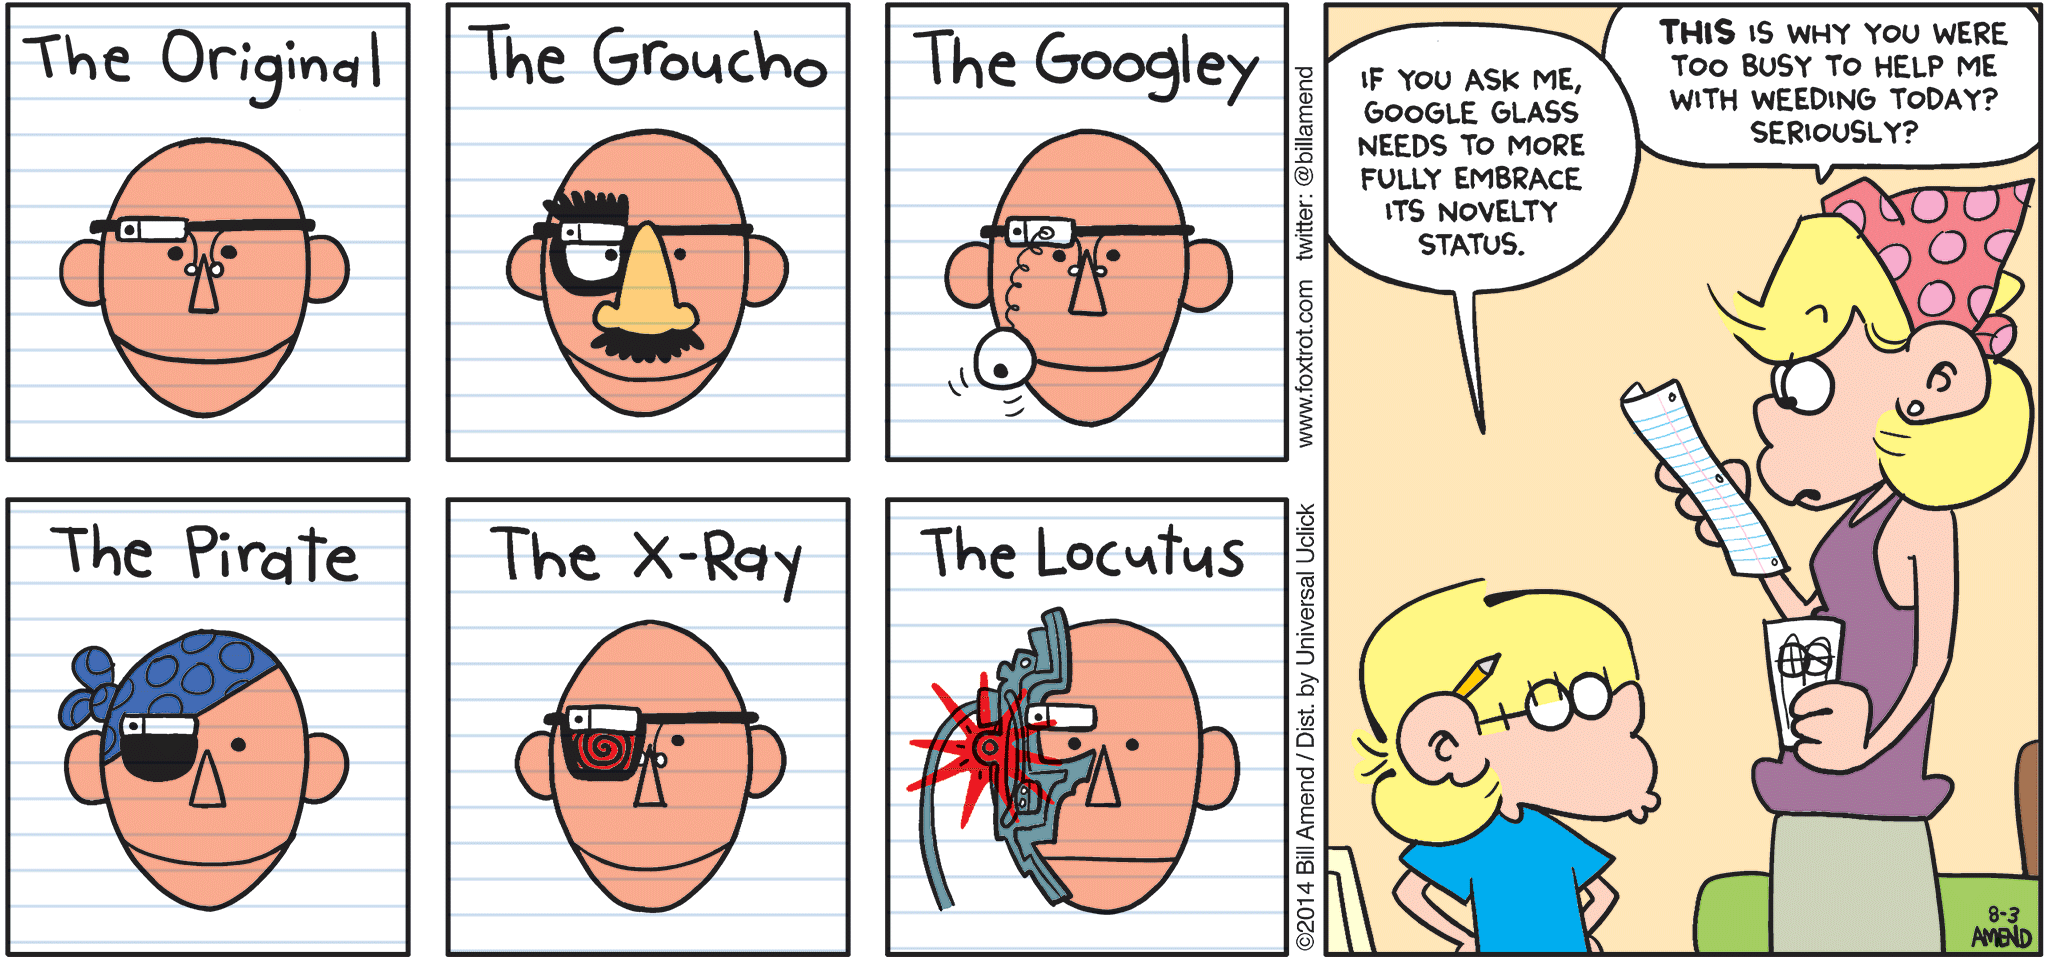 FoxTrot by Bill Amend - ""Glassy"" published July 27, 2014 - Jason: If you ask me, Google Glass needs to more fully embrace its novelty status. Andy: THIS is why you were too busy to help me with weeding today? Seriously?